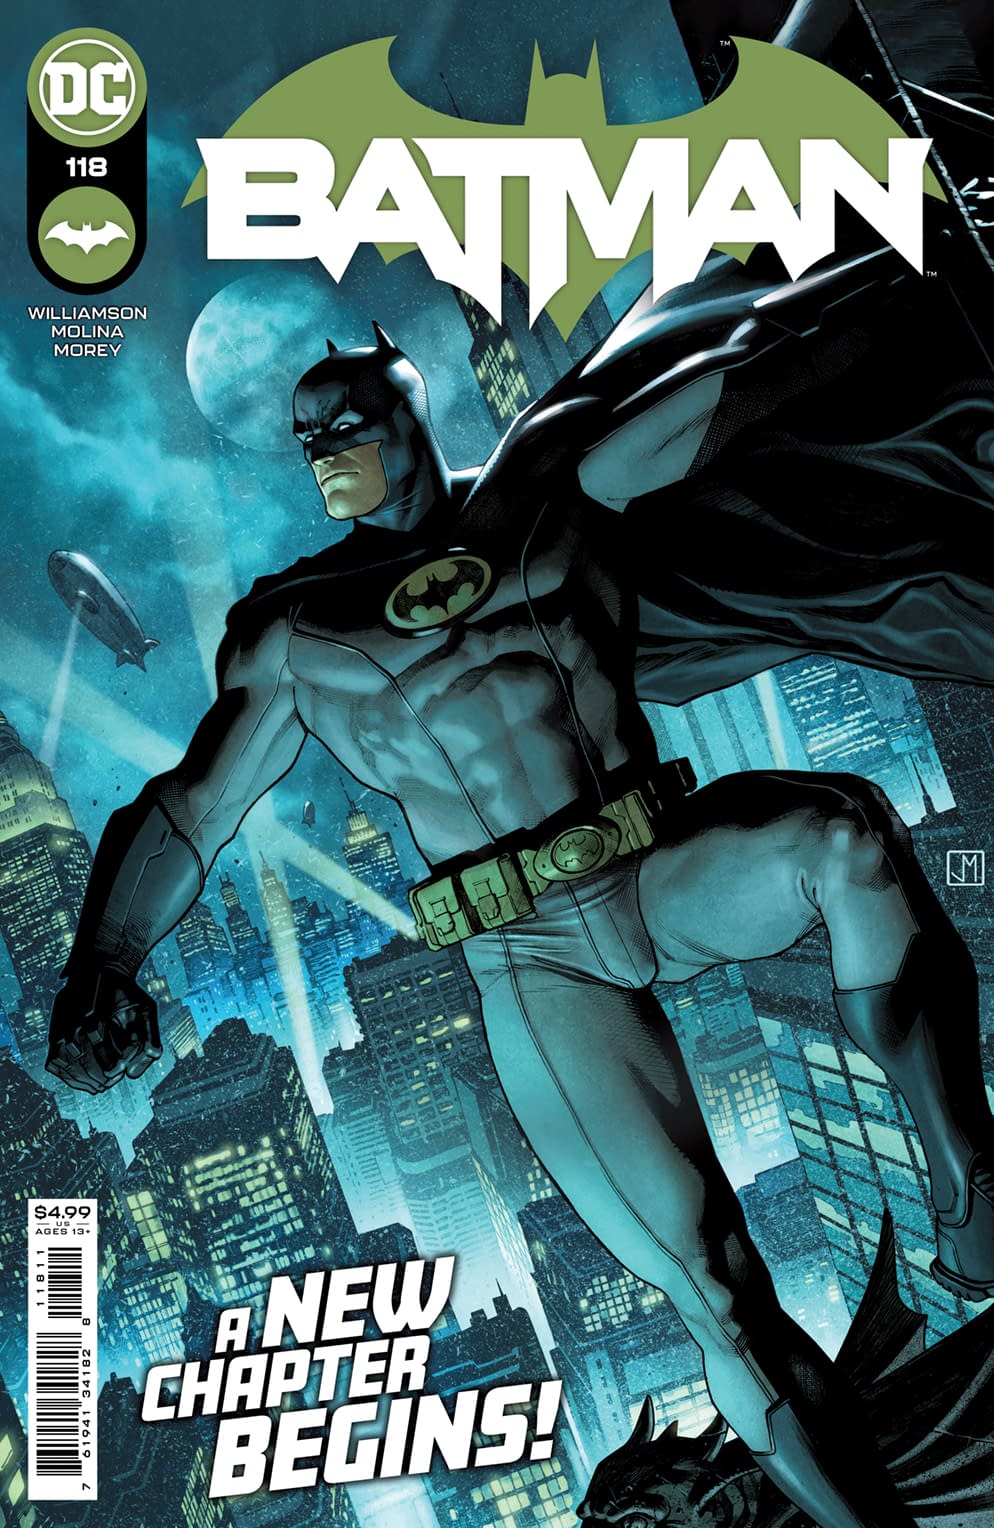 Batman #118 Preview: New Creative Team for Post-Fear-State World